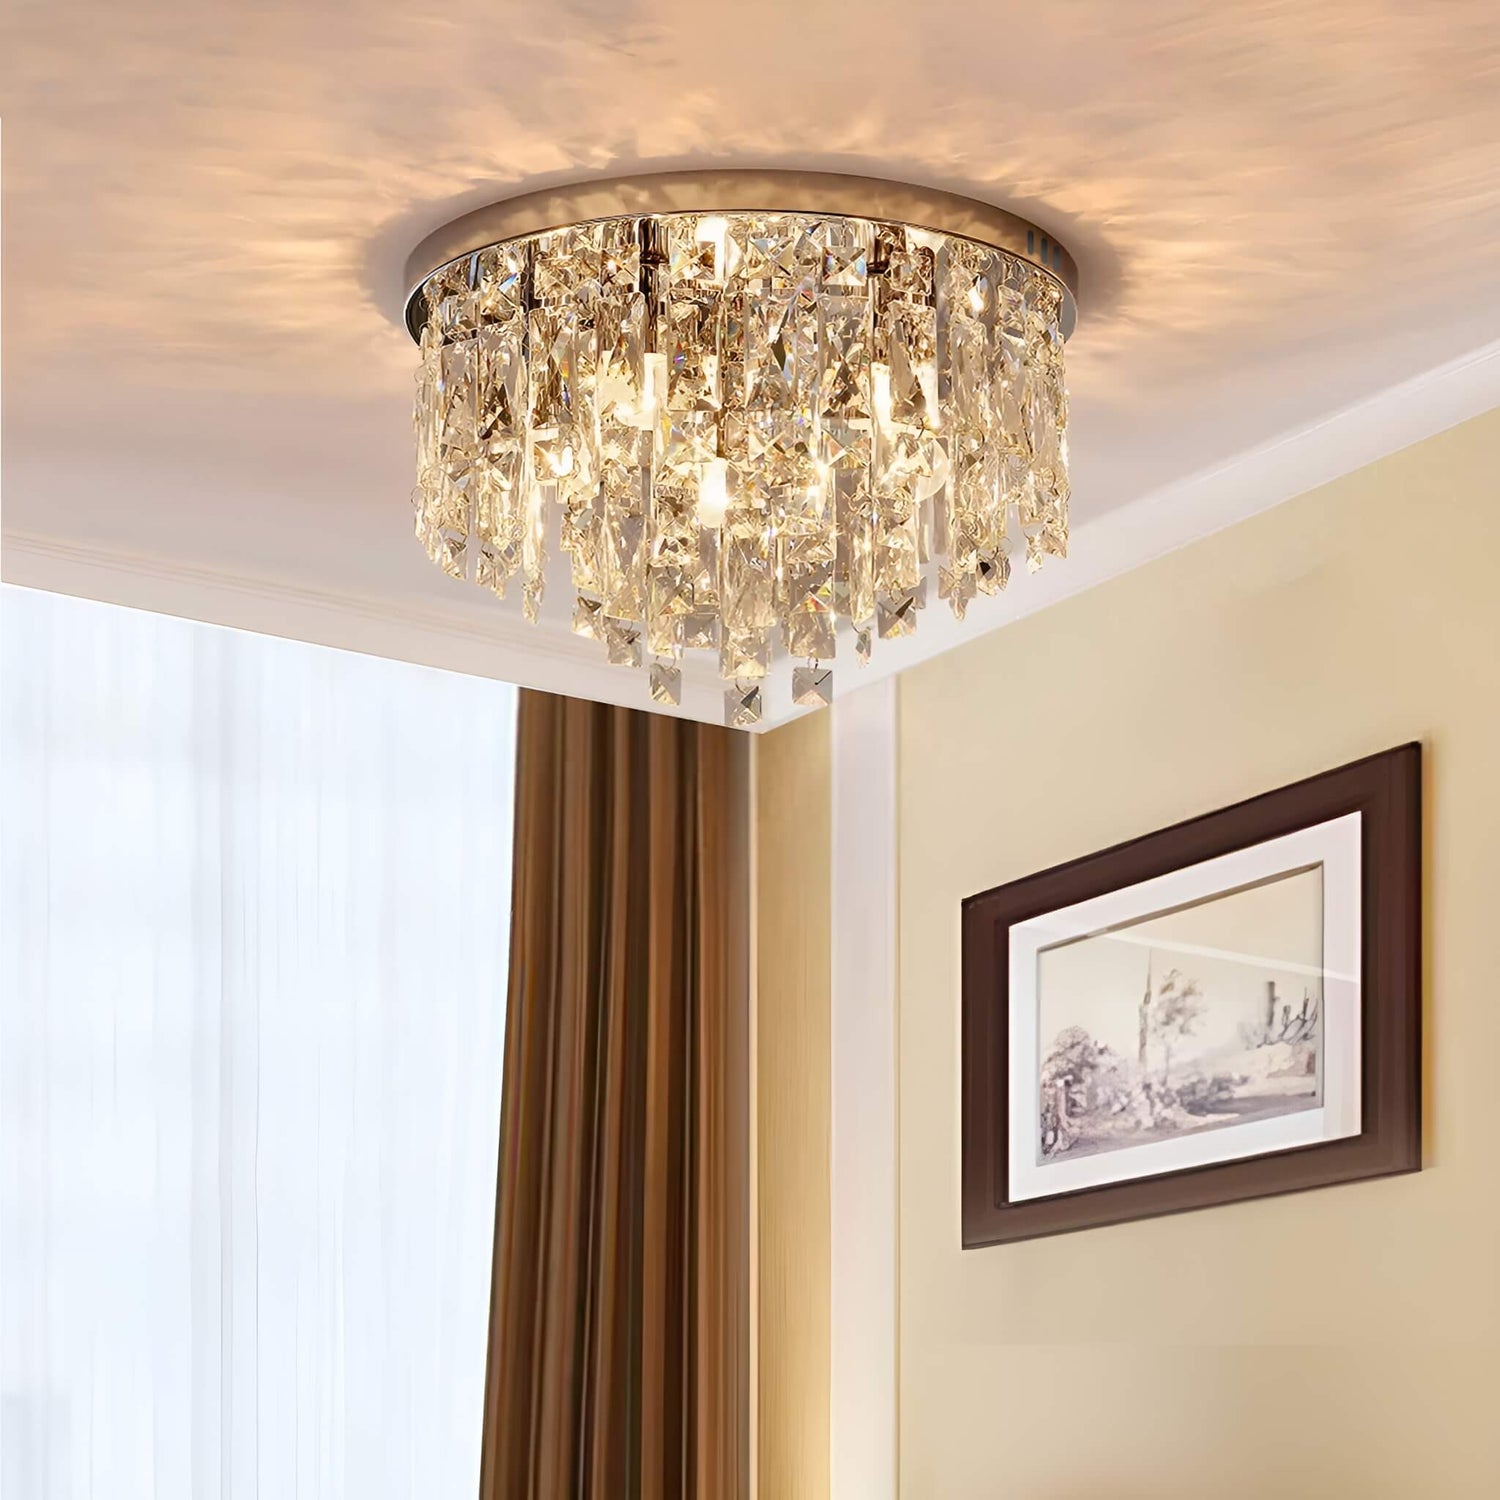 Contemporary Round Crystal Chandelier - Flush Mount Ceiling Lights ...